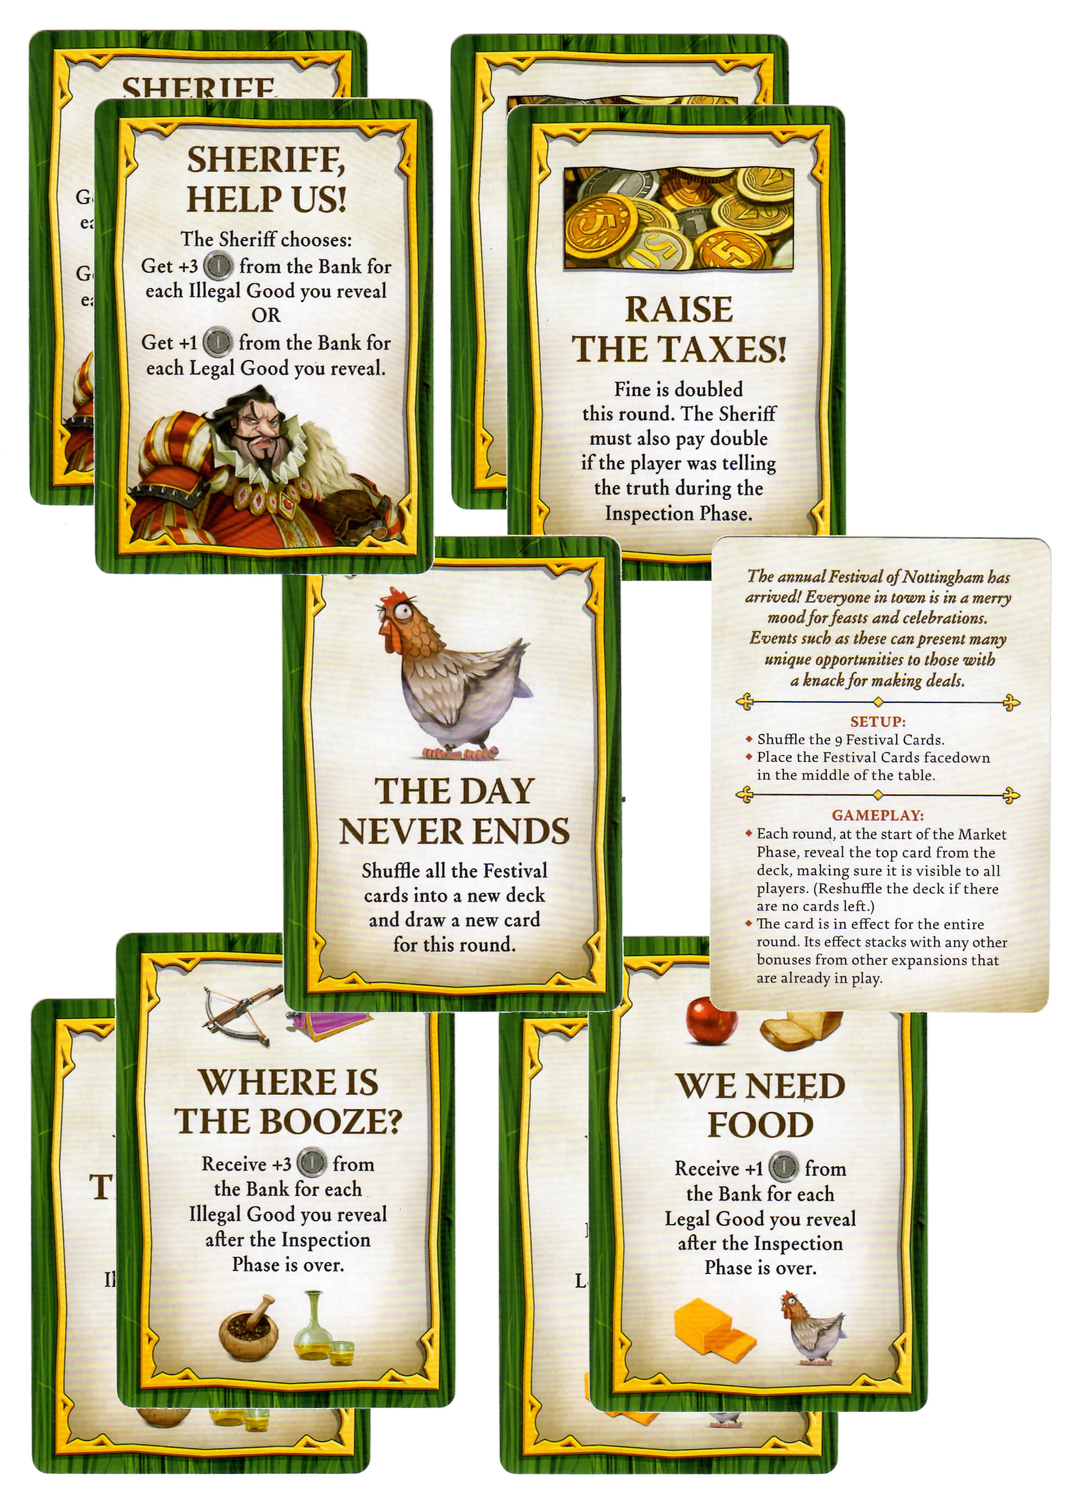 Sheriff of Nottingham: 2nd Edition – Festival of Nottingham for use with the board game S, Sheriff of Nottingham, sold at the BoardGameGeek Store